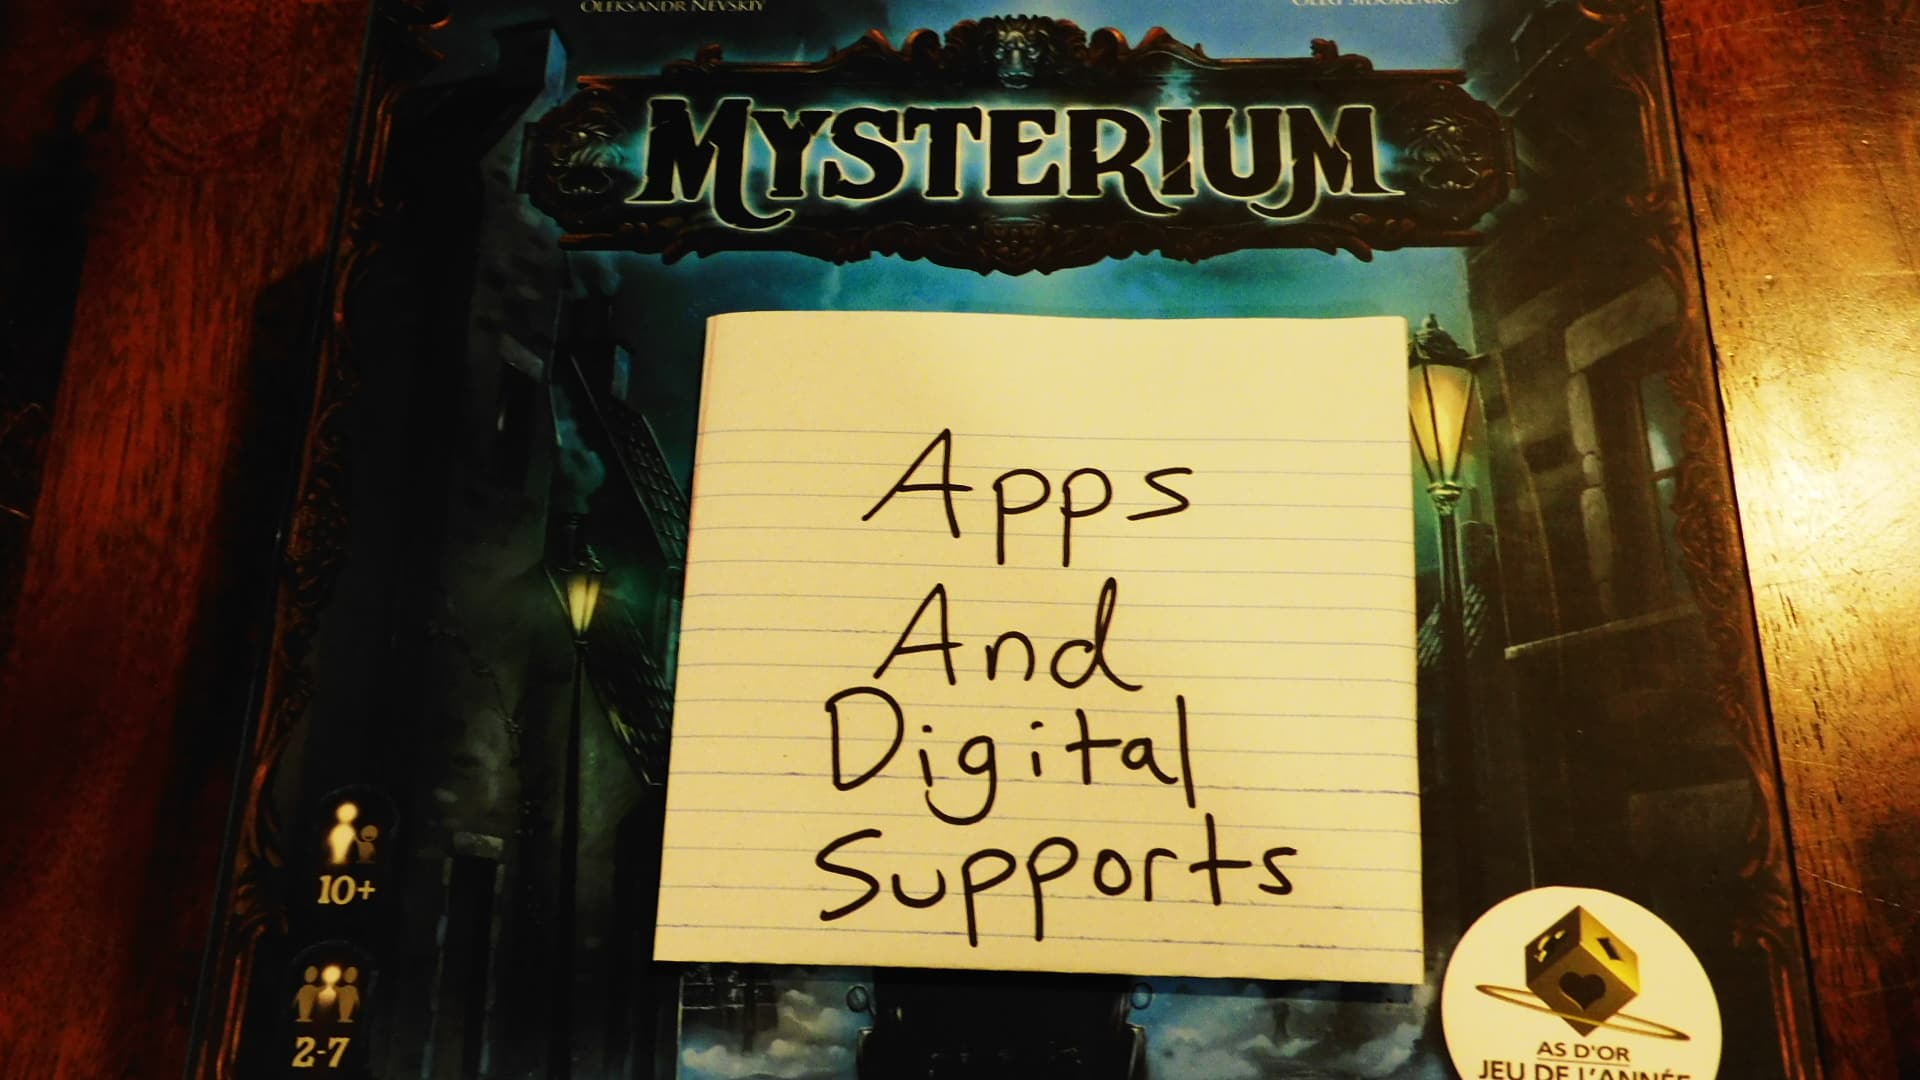 Mysterium's game box with a piece of paper on it reading "Apps And Digital Supports."